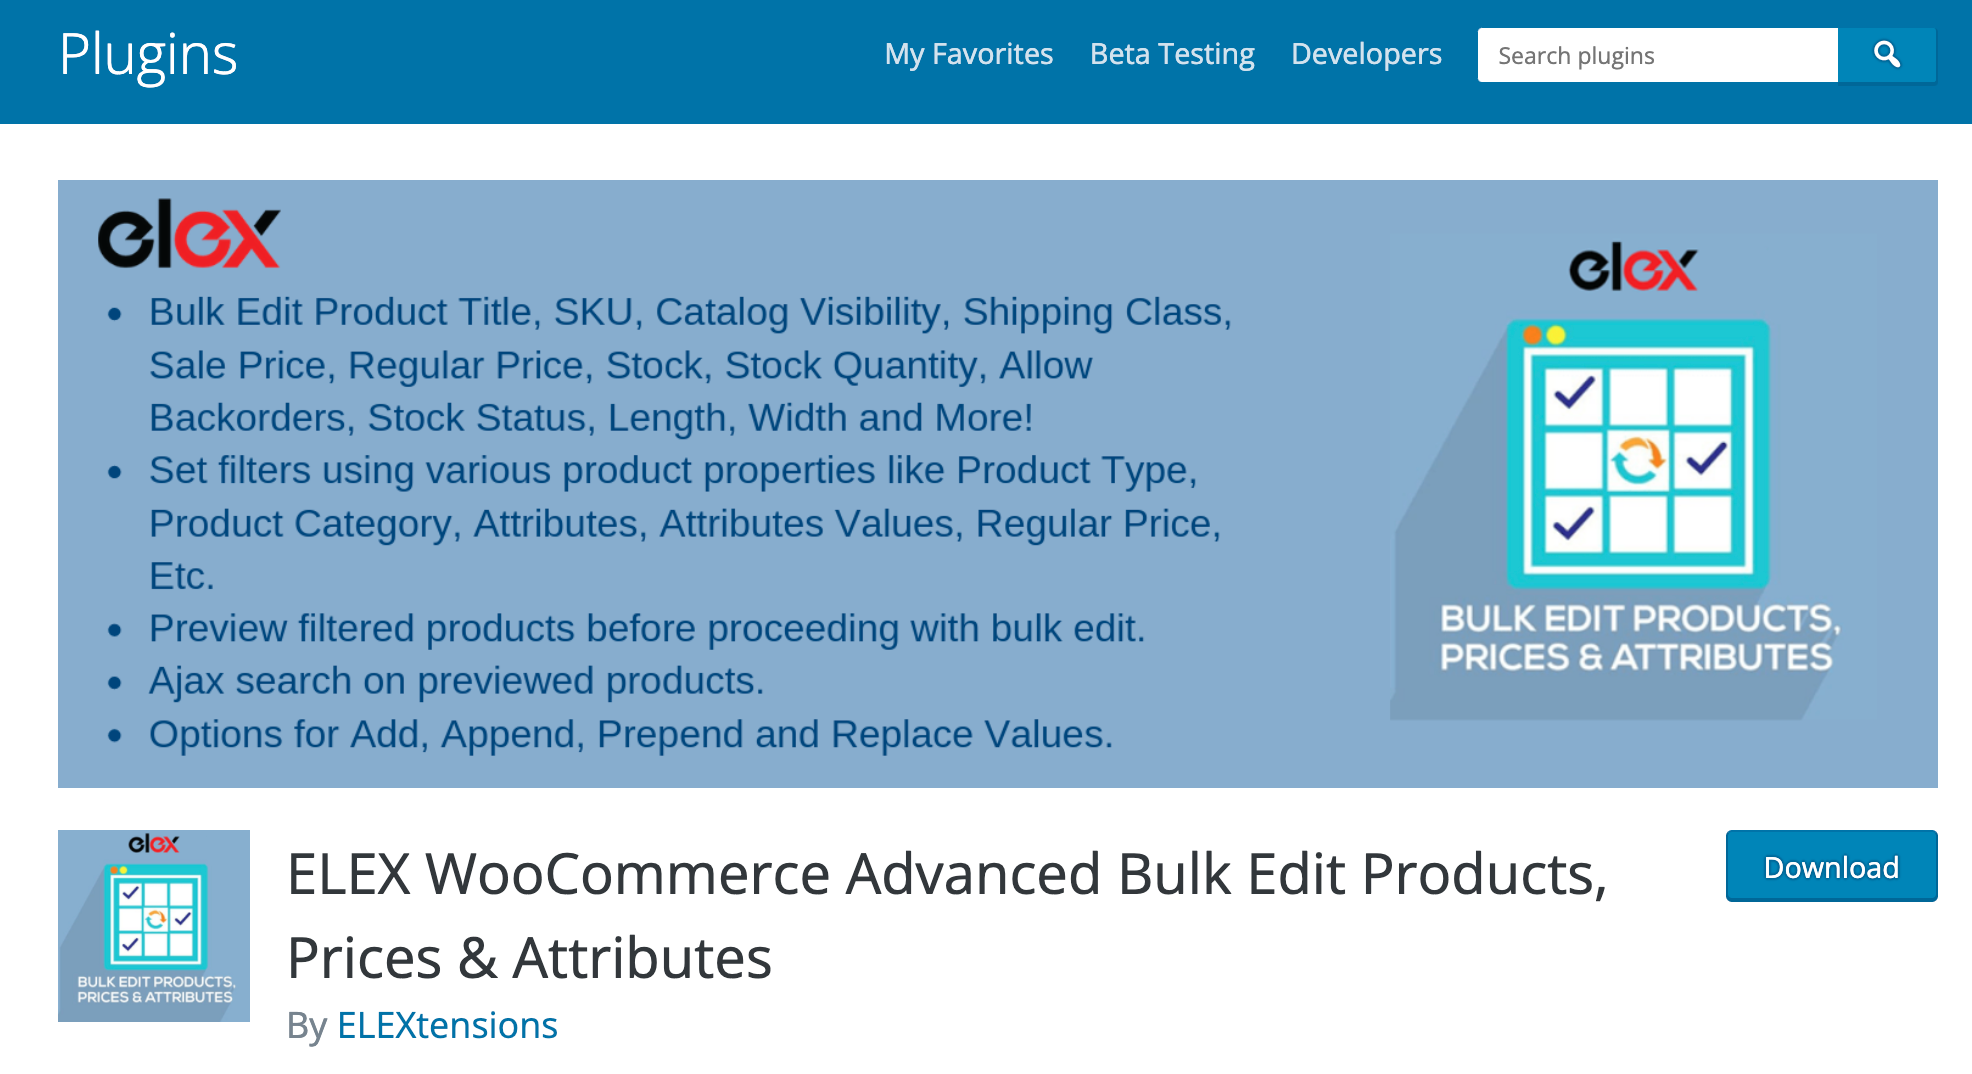 Let’s have a look at some of the benefits of utilizing this plugin over WooCommerce’s default bulk edit option